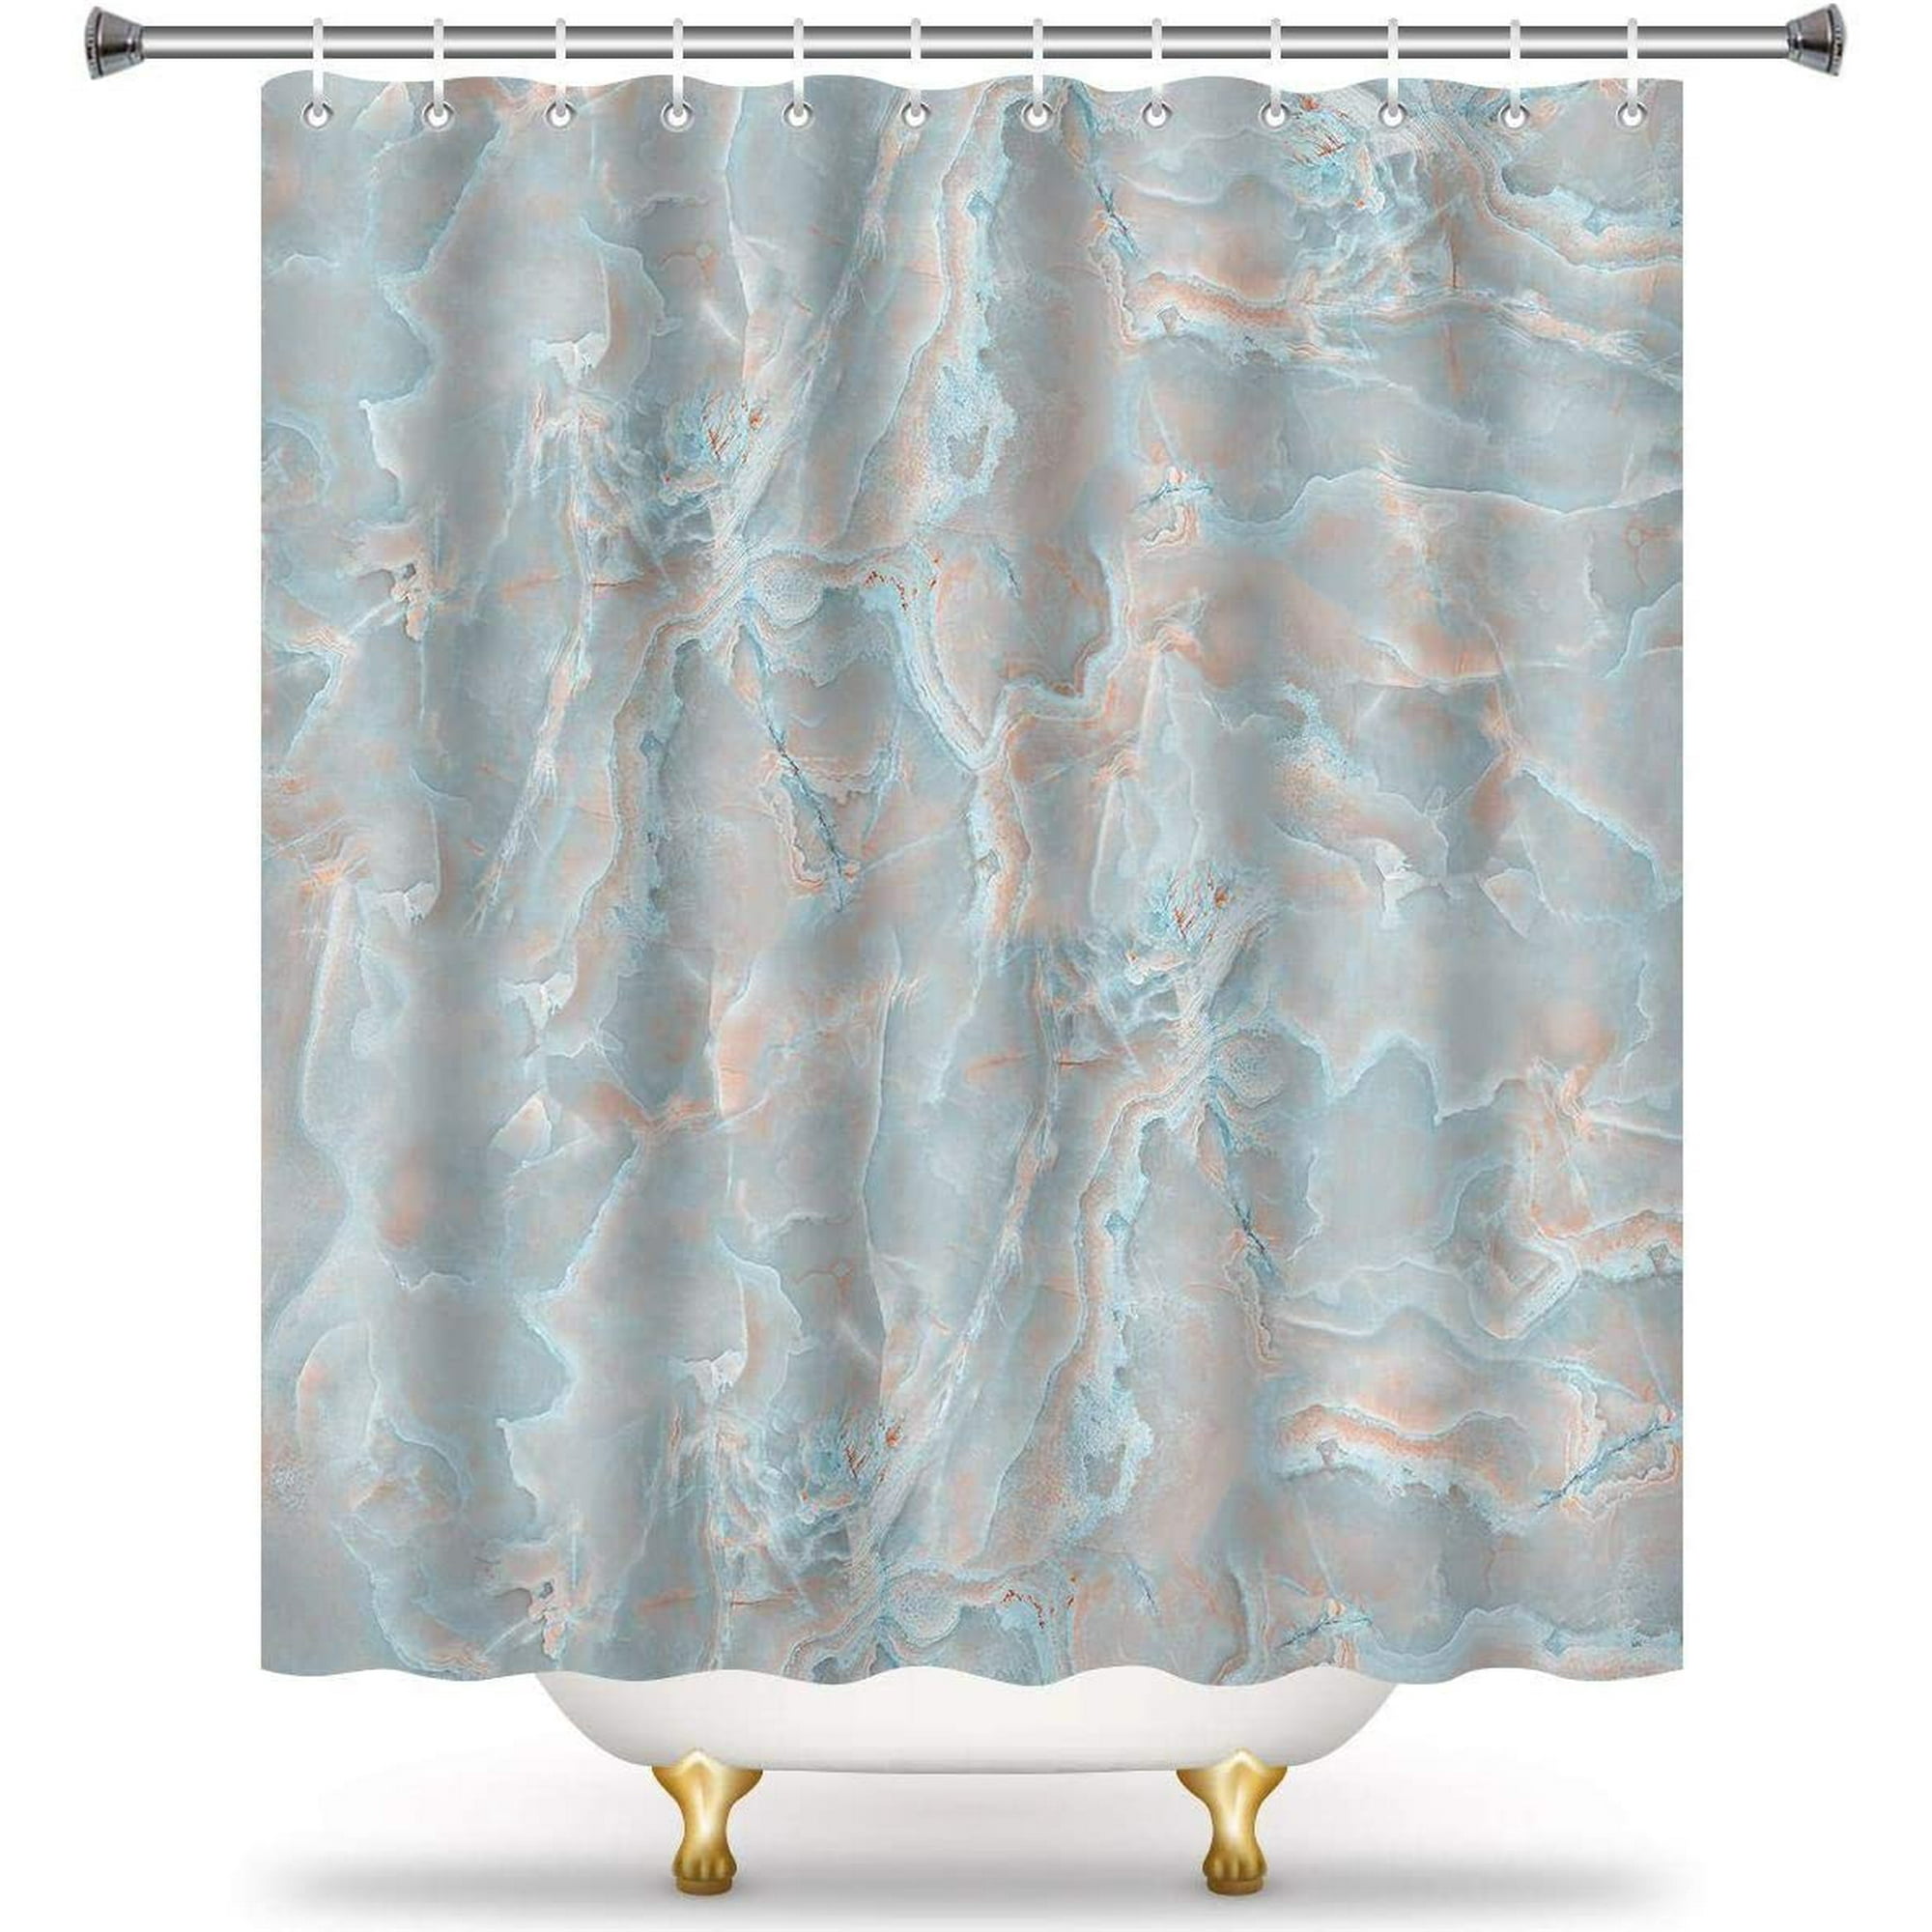 Teal Marble Shower Curtain Liner Blue, Blue And White Marble Shower Curtain